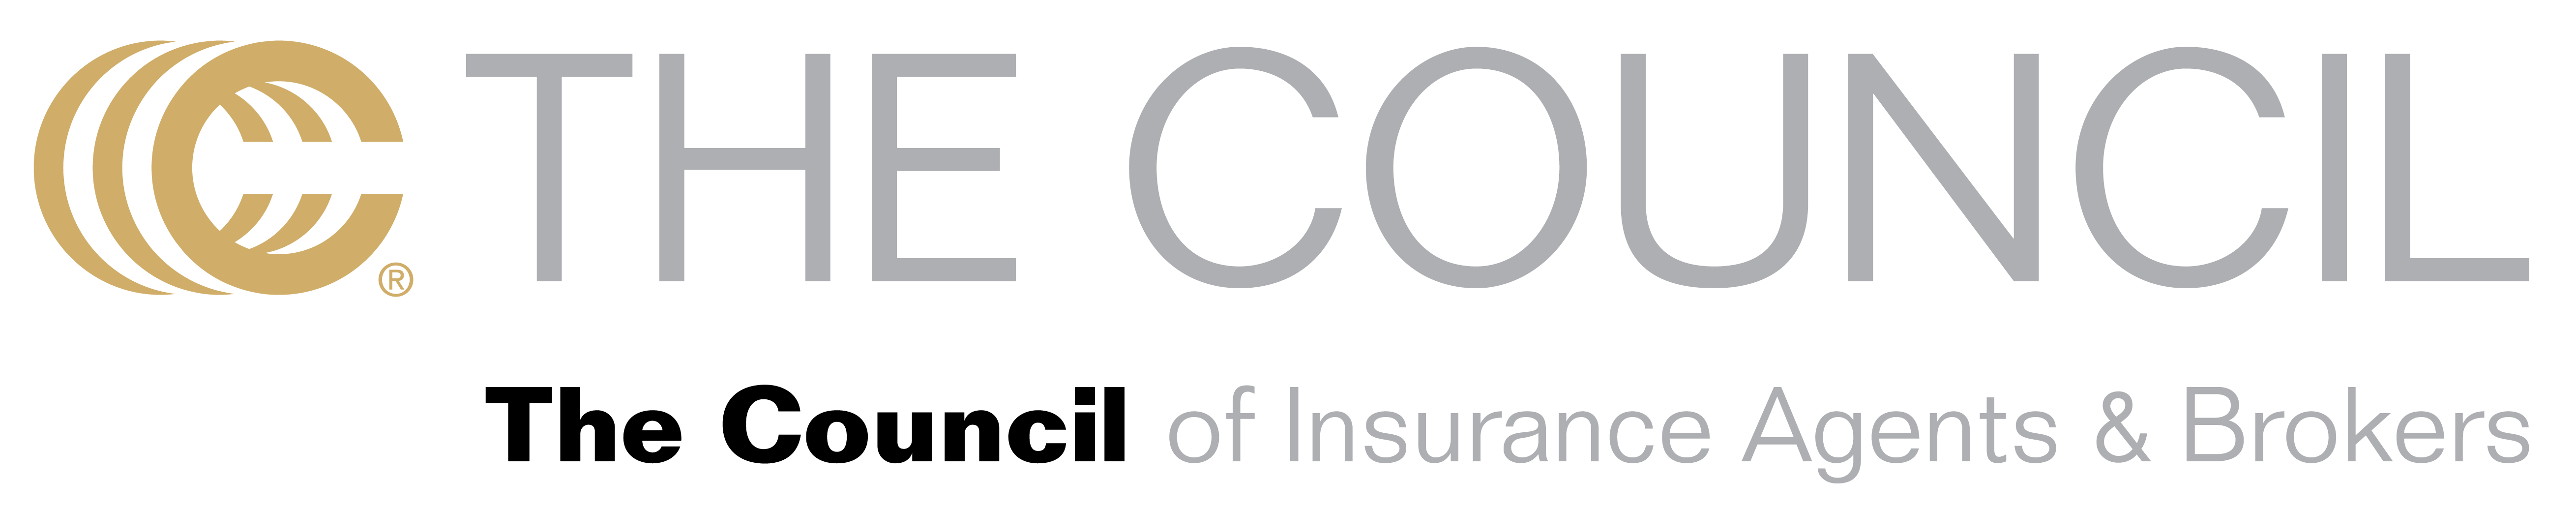 The council of insurance agents brokers logo